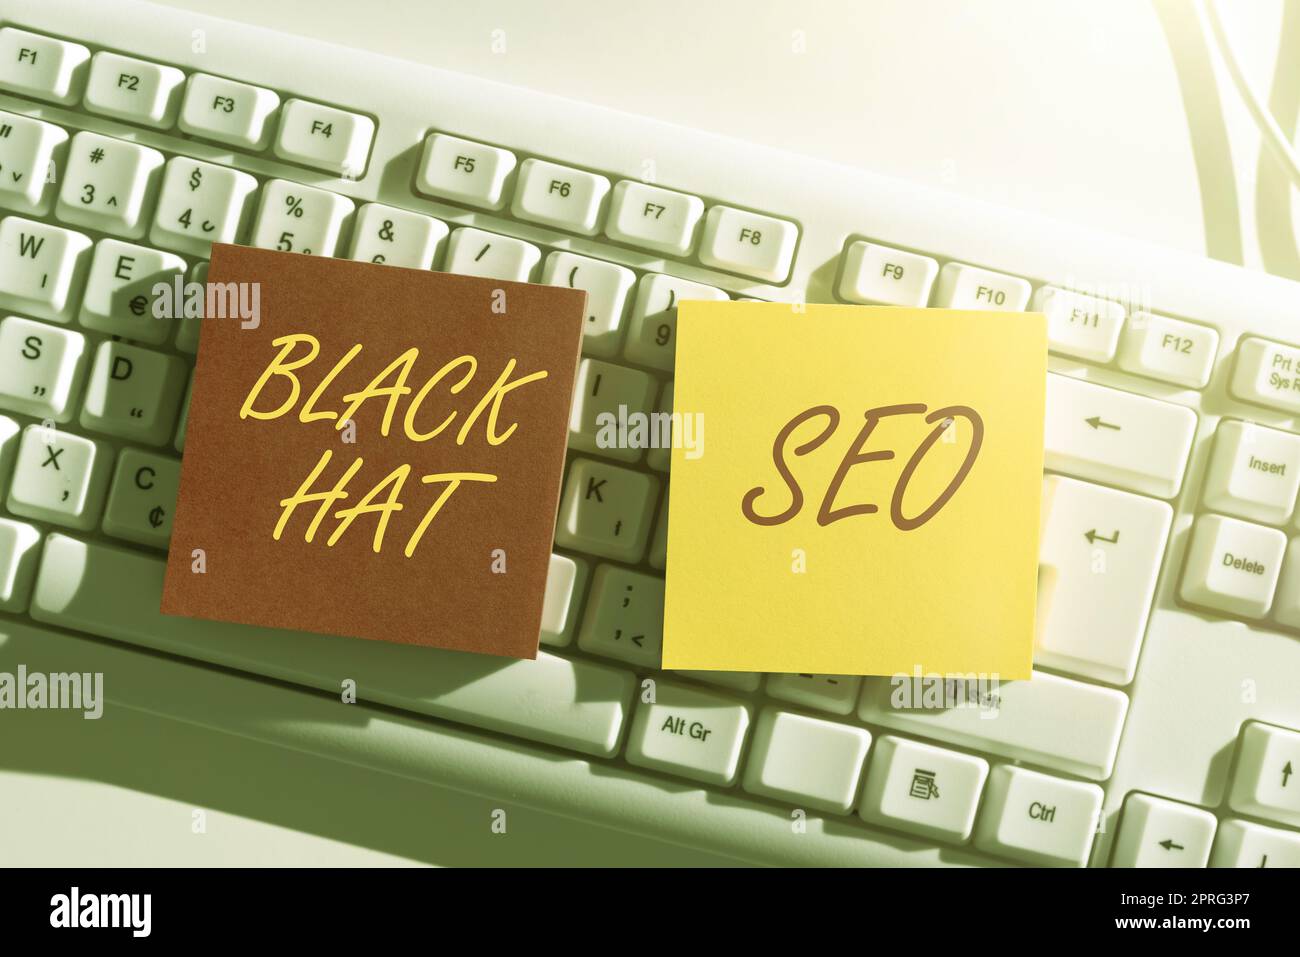 Writing displaying text Black Hat Seo. Word for Search Engine Optimization using techniques to cheat browsers Lady in suit holding pen symbolizing successful teamwork accomplishments. Stock Photo